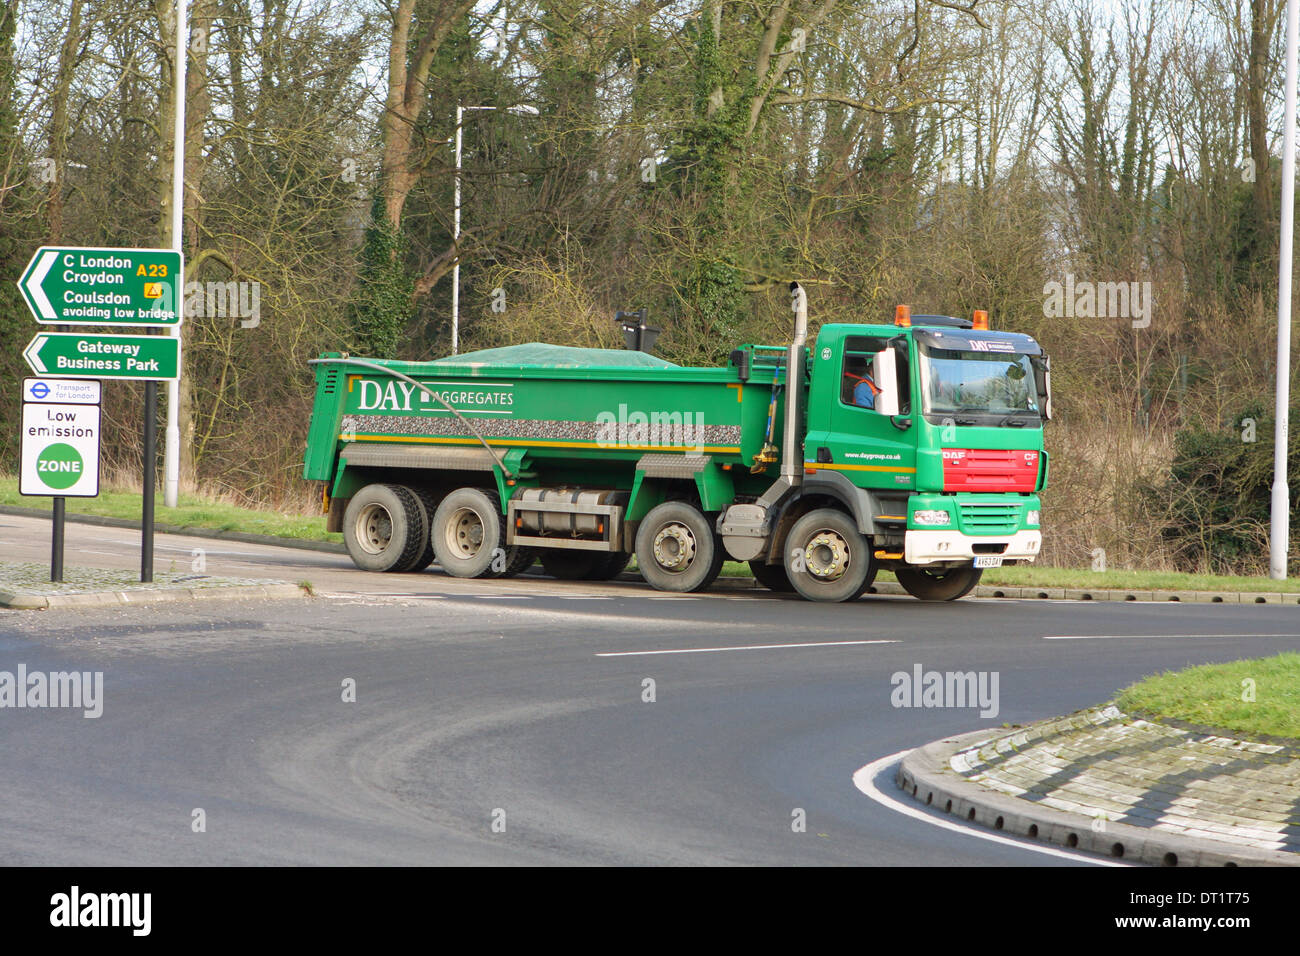 A truck entering a roundabout in Coulsdon, Surrey, England. Stock Photo